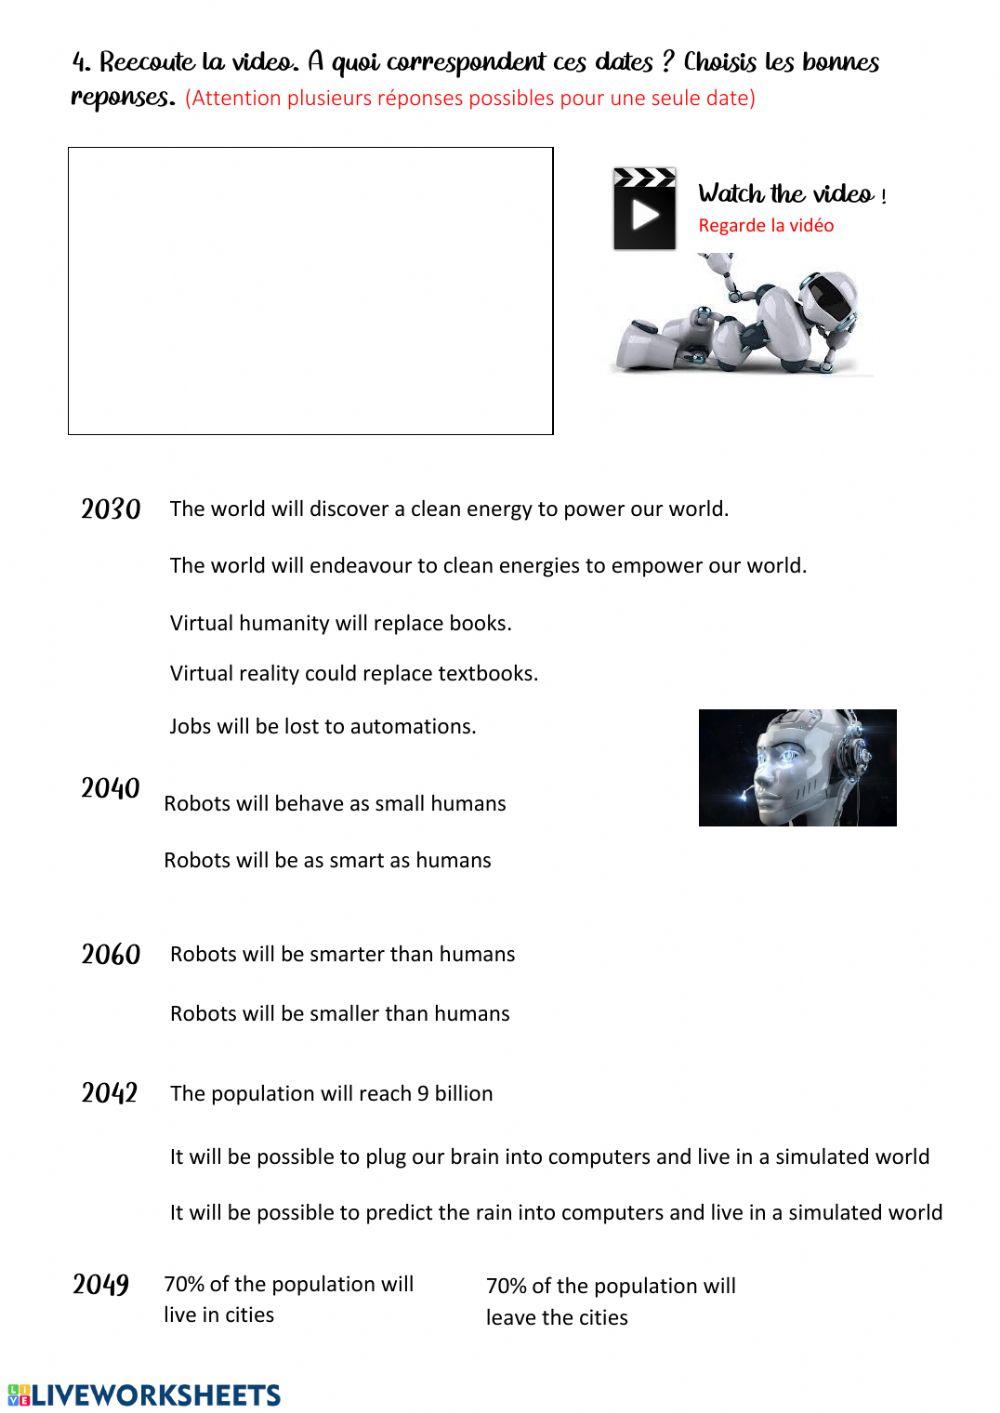 What will the future be like in 2049